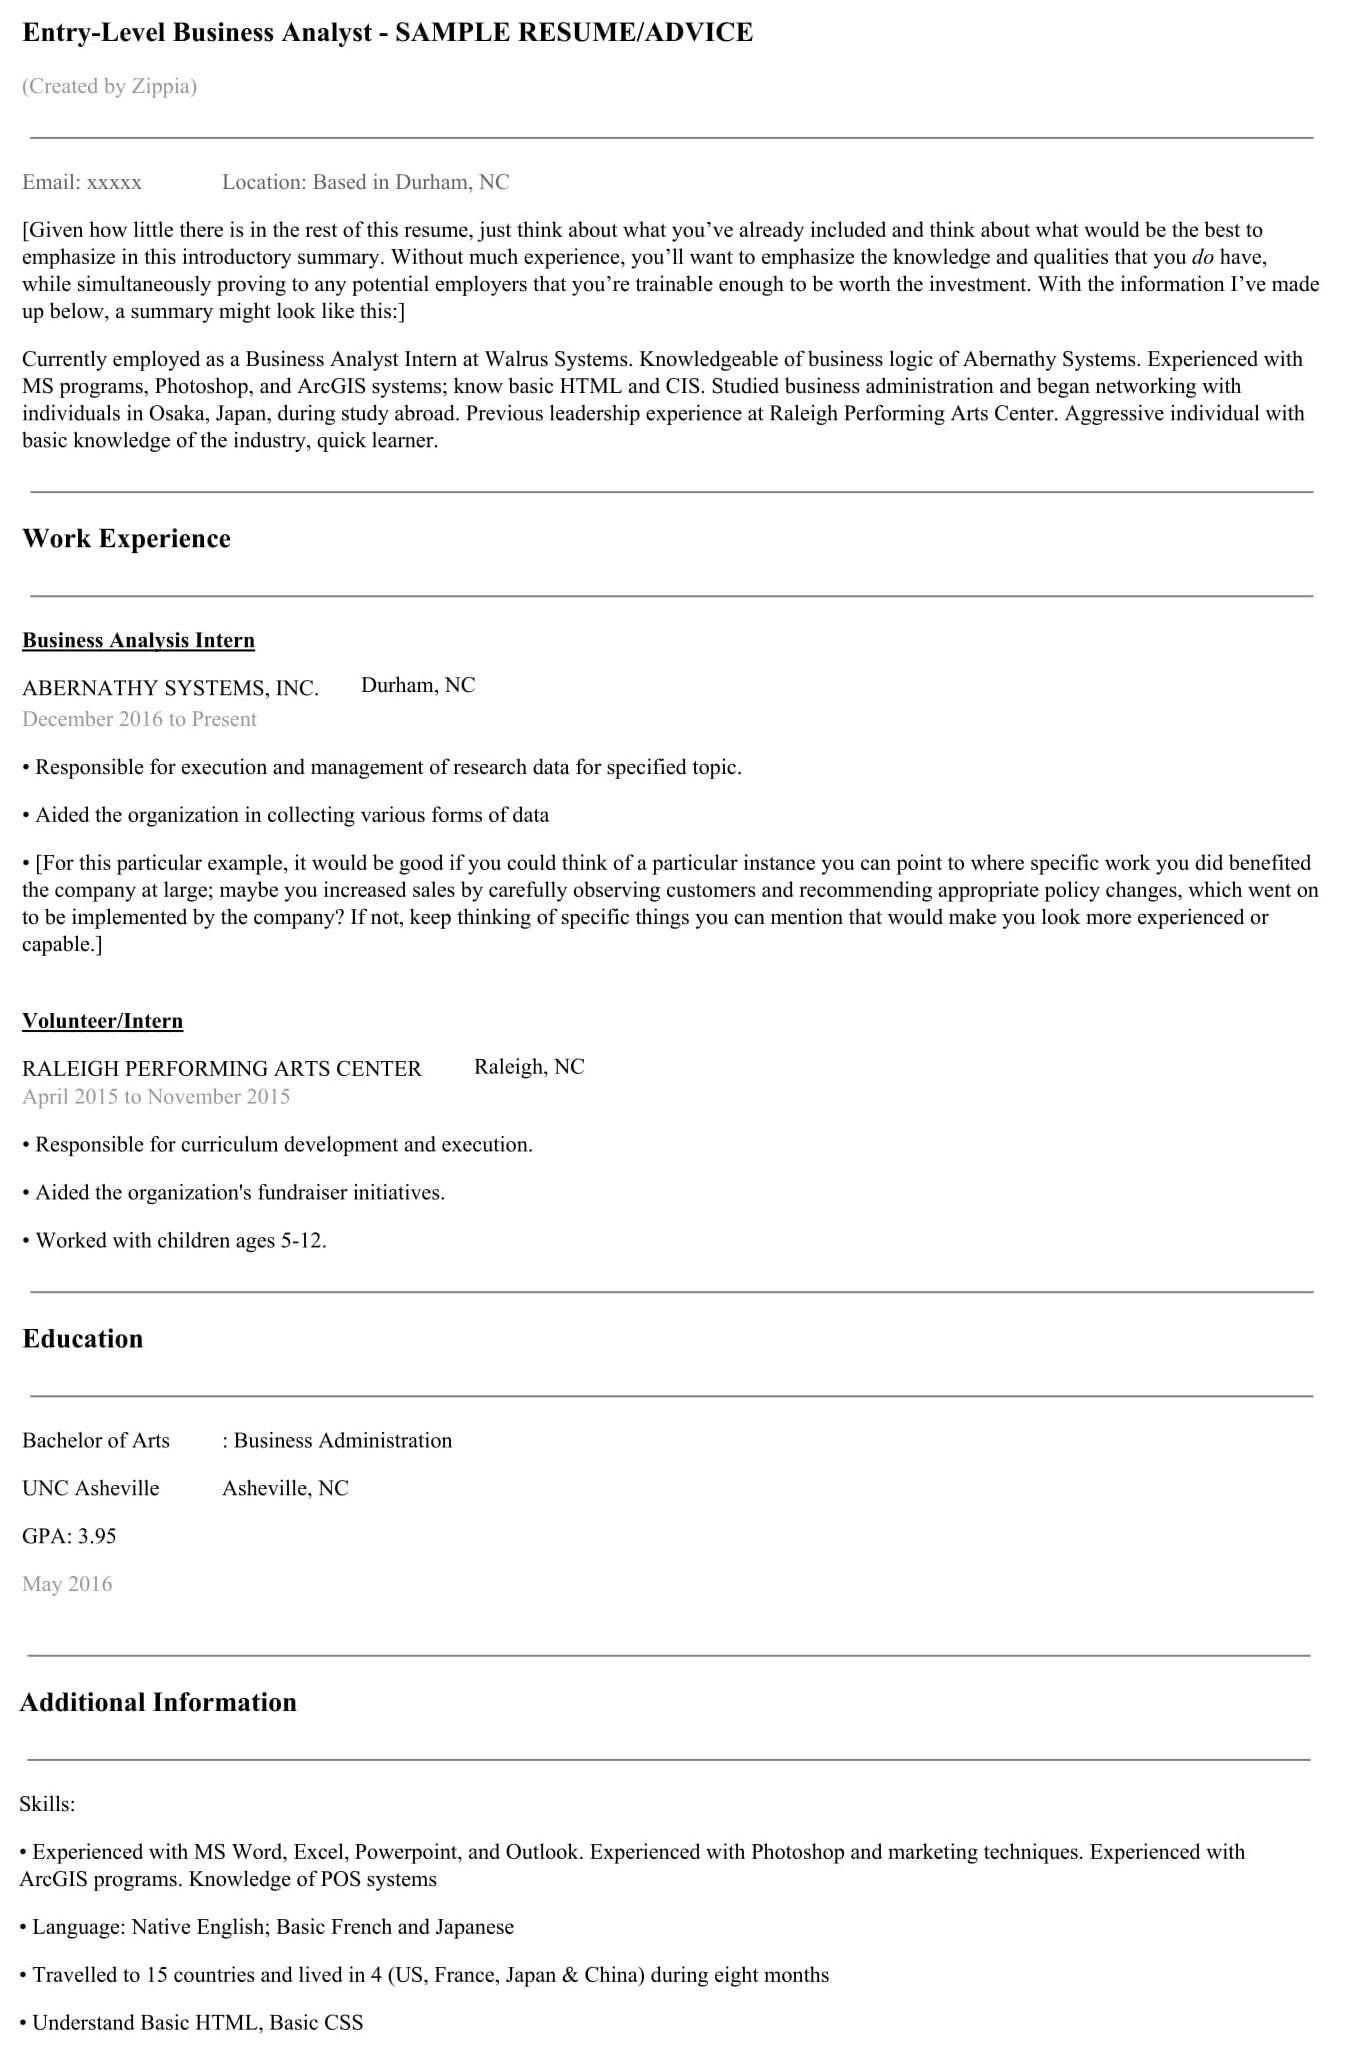 Sample Resume Of Entry Level Of Business Anlayst How to Write the Perfect Business Analyst Resume – Zippia